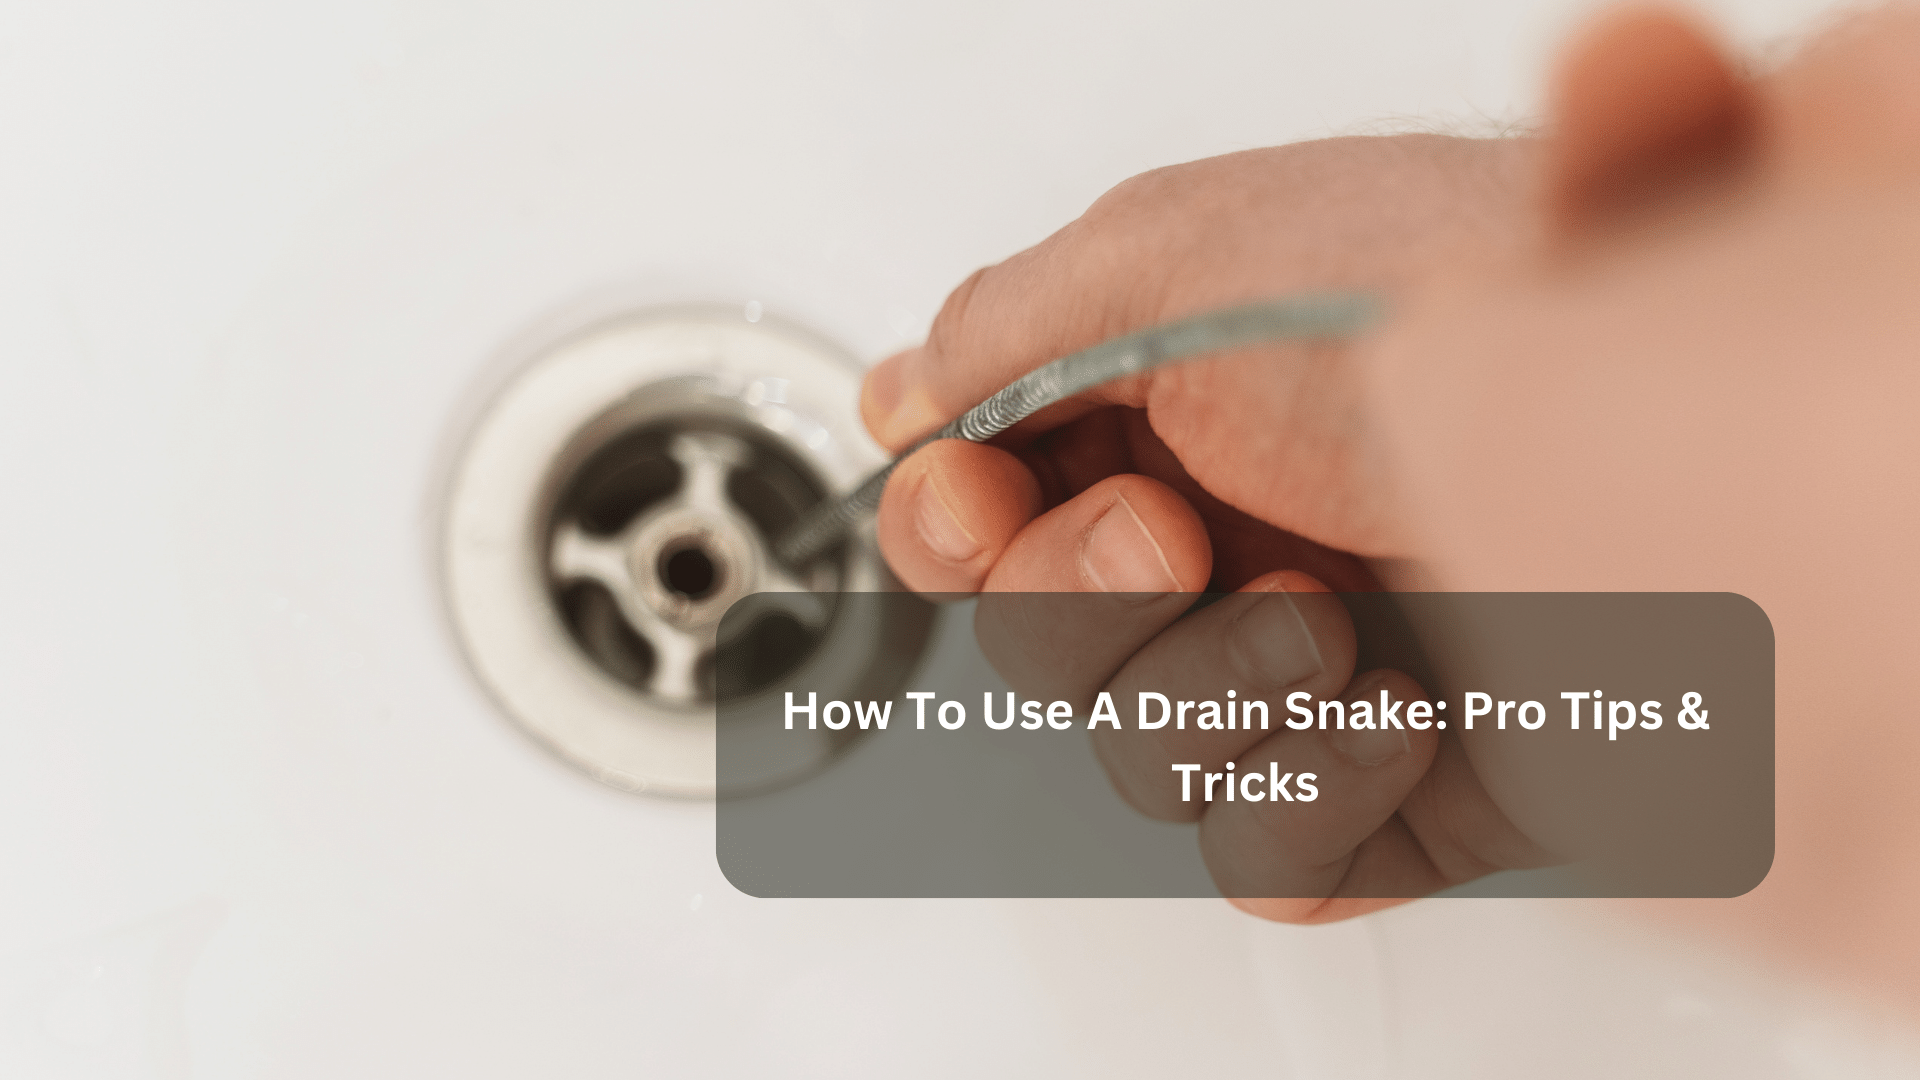 How To Use A Drain Snake For Stubborn Clogs